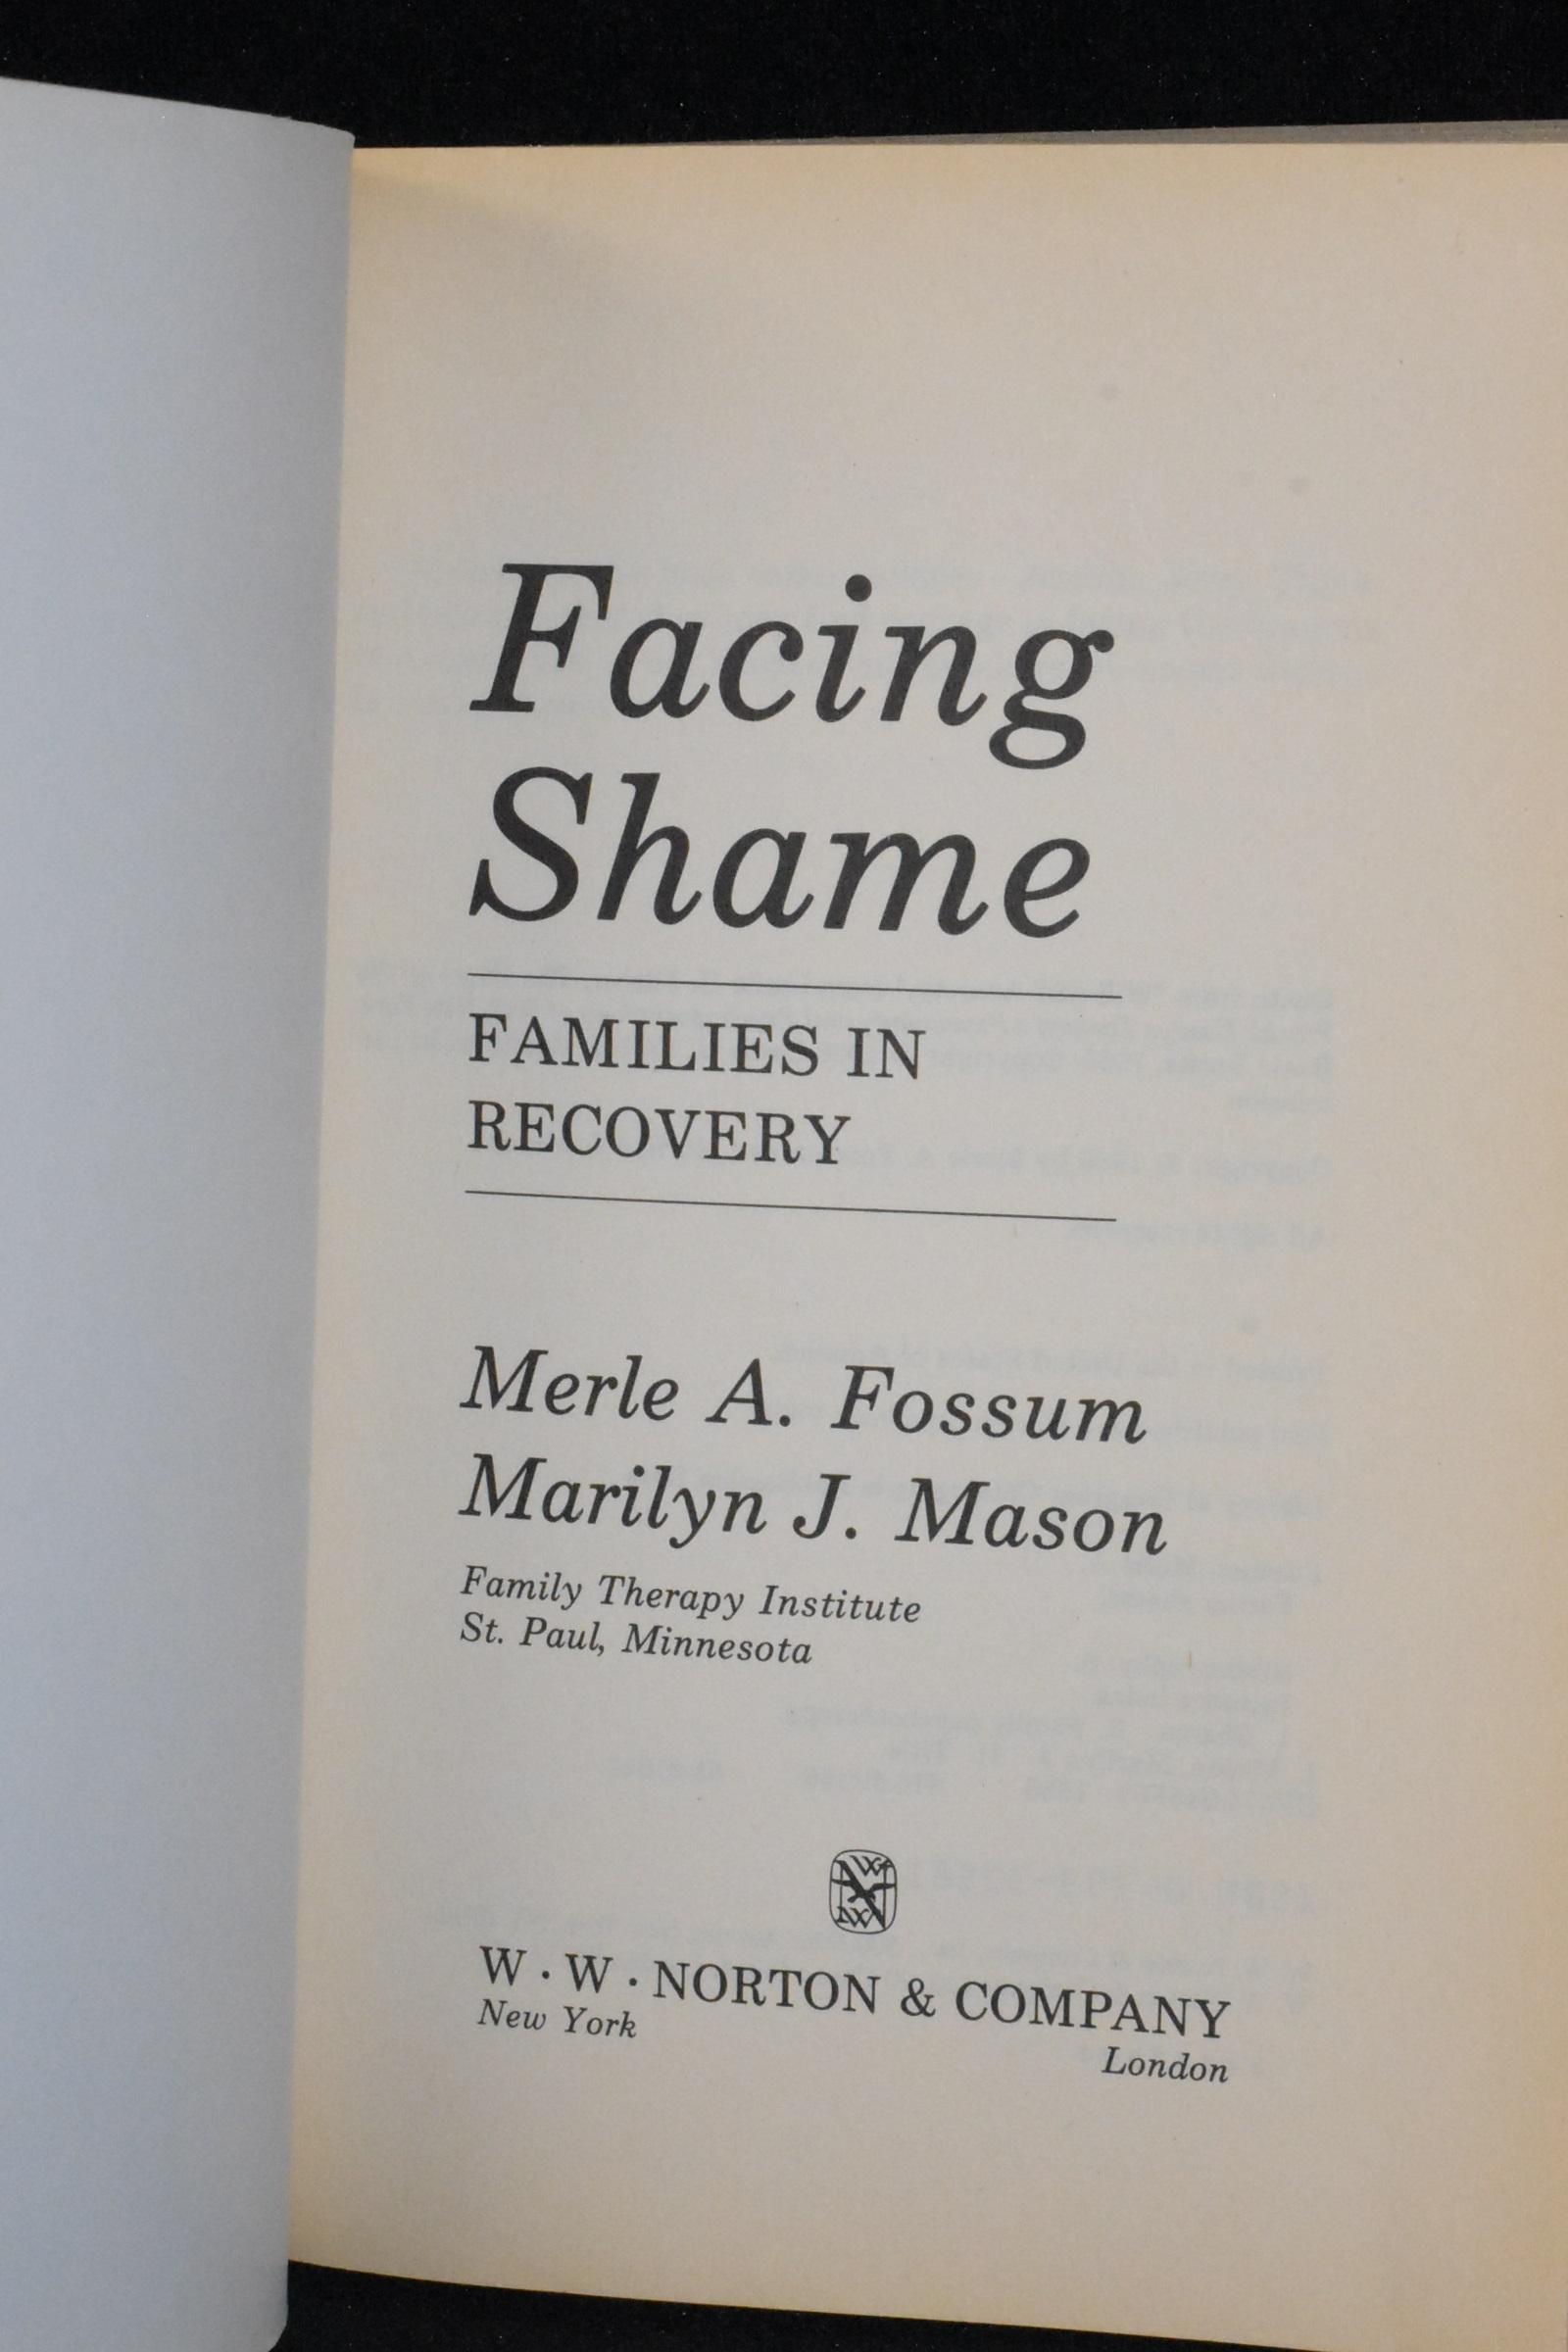  Facing Shame: Families in Recovery: 9780393305814: Fossum,  Merle A., Mason, Marilyn J.: Books